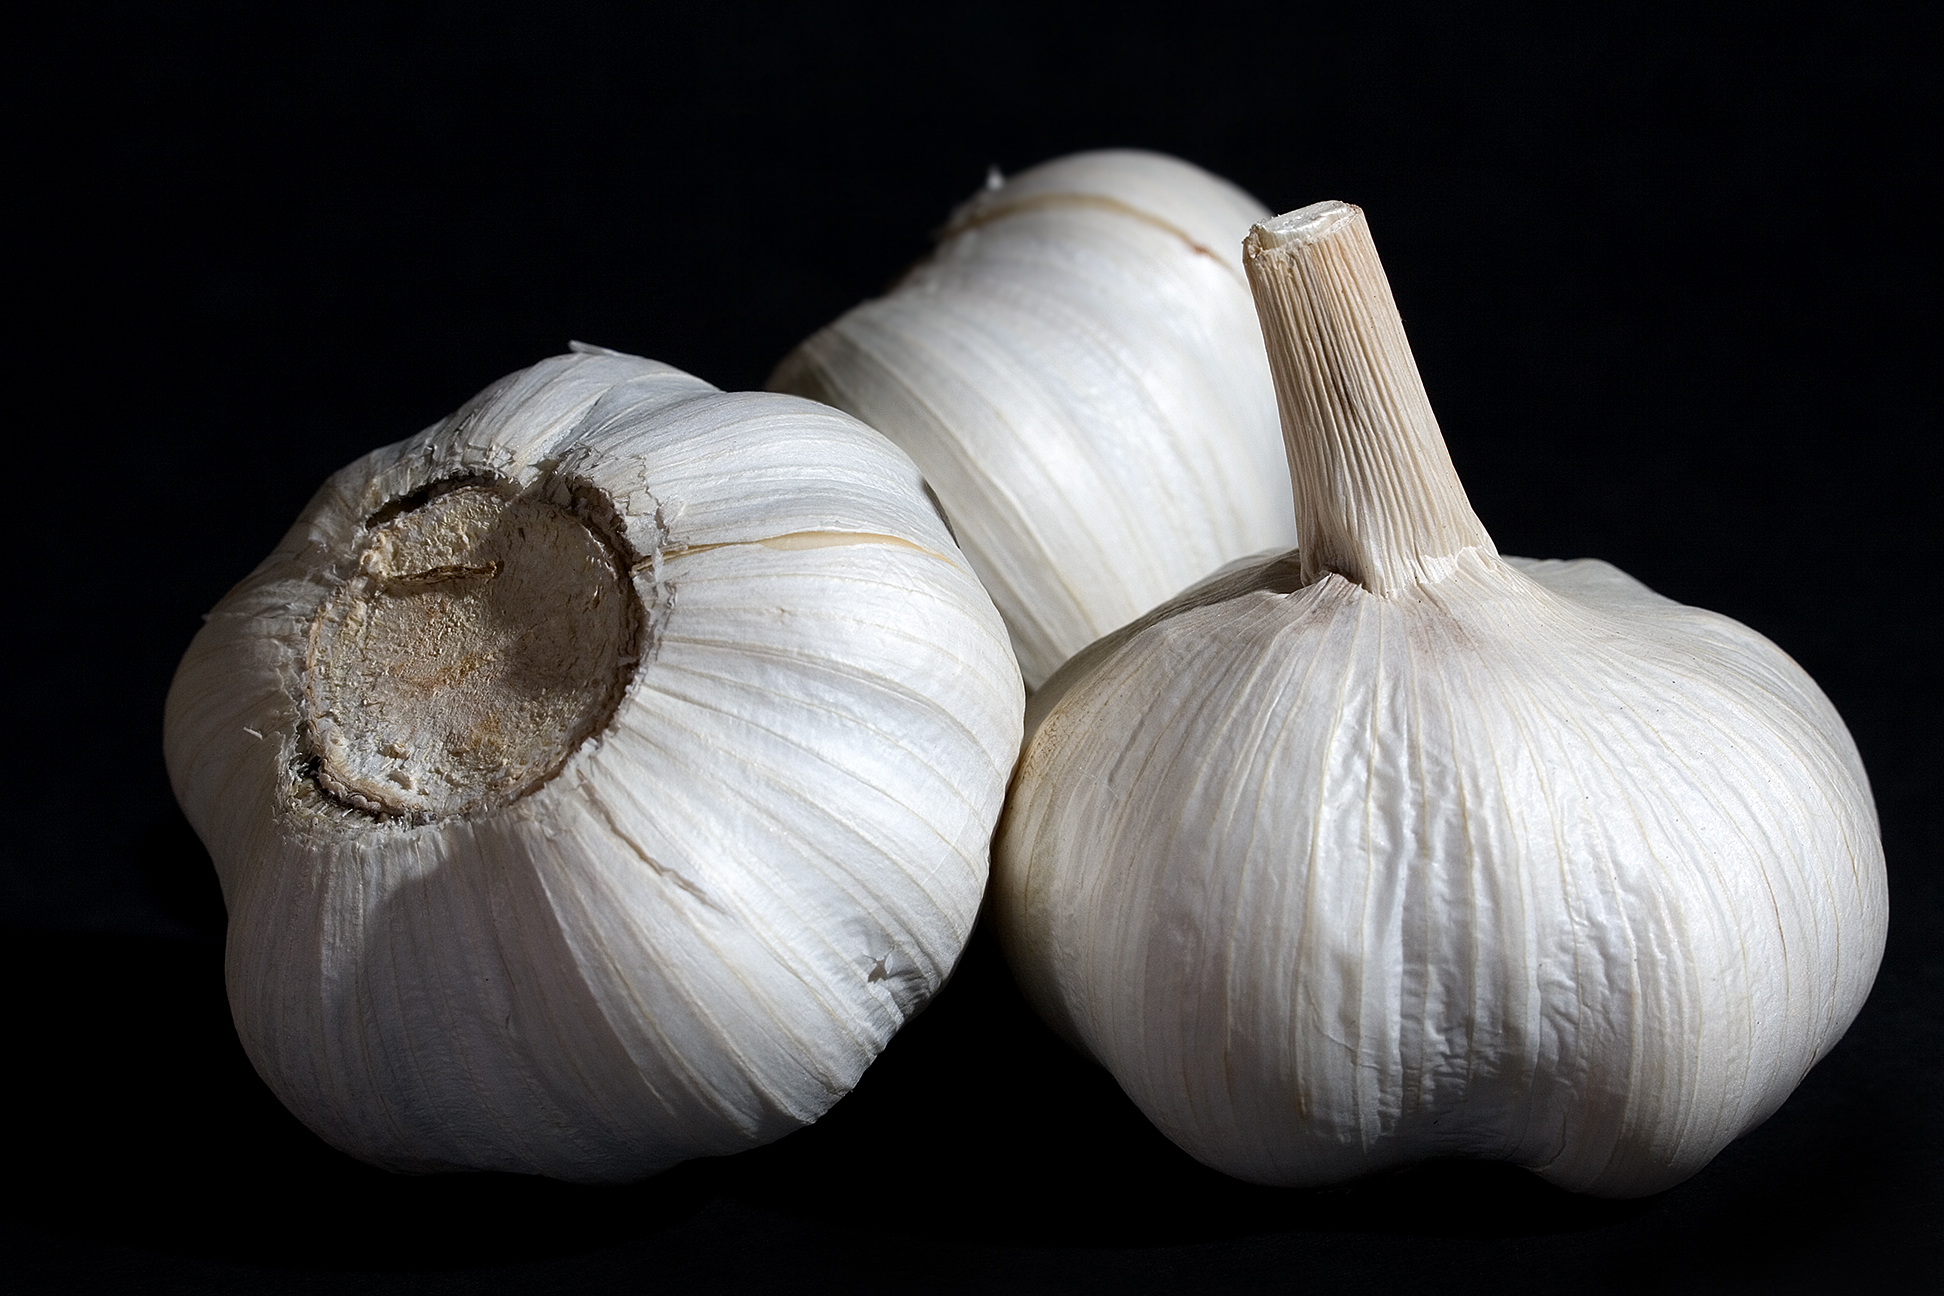 Paul said he had never heard of using garlic to protect oneself, except in Hollywood films. 